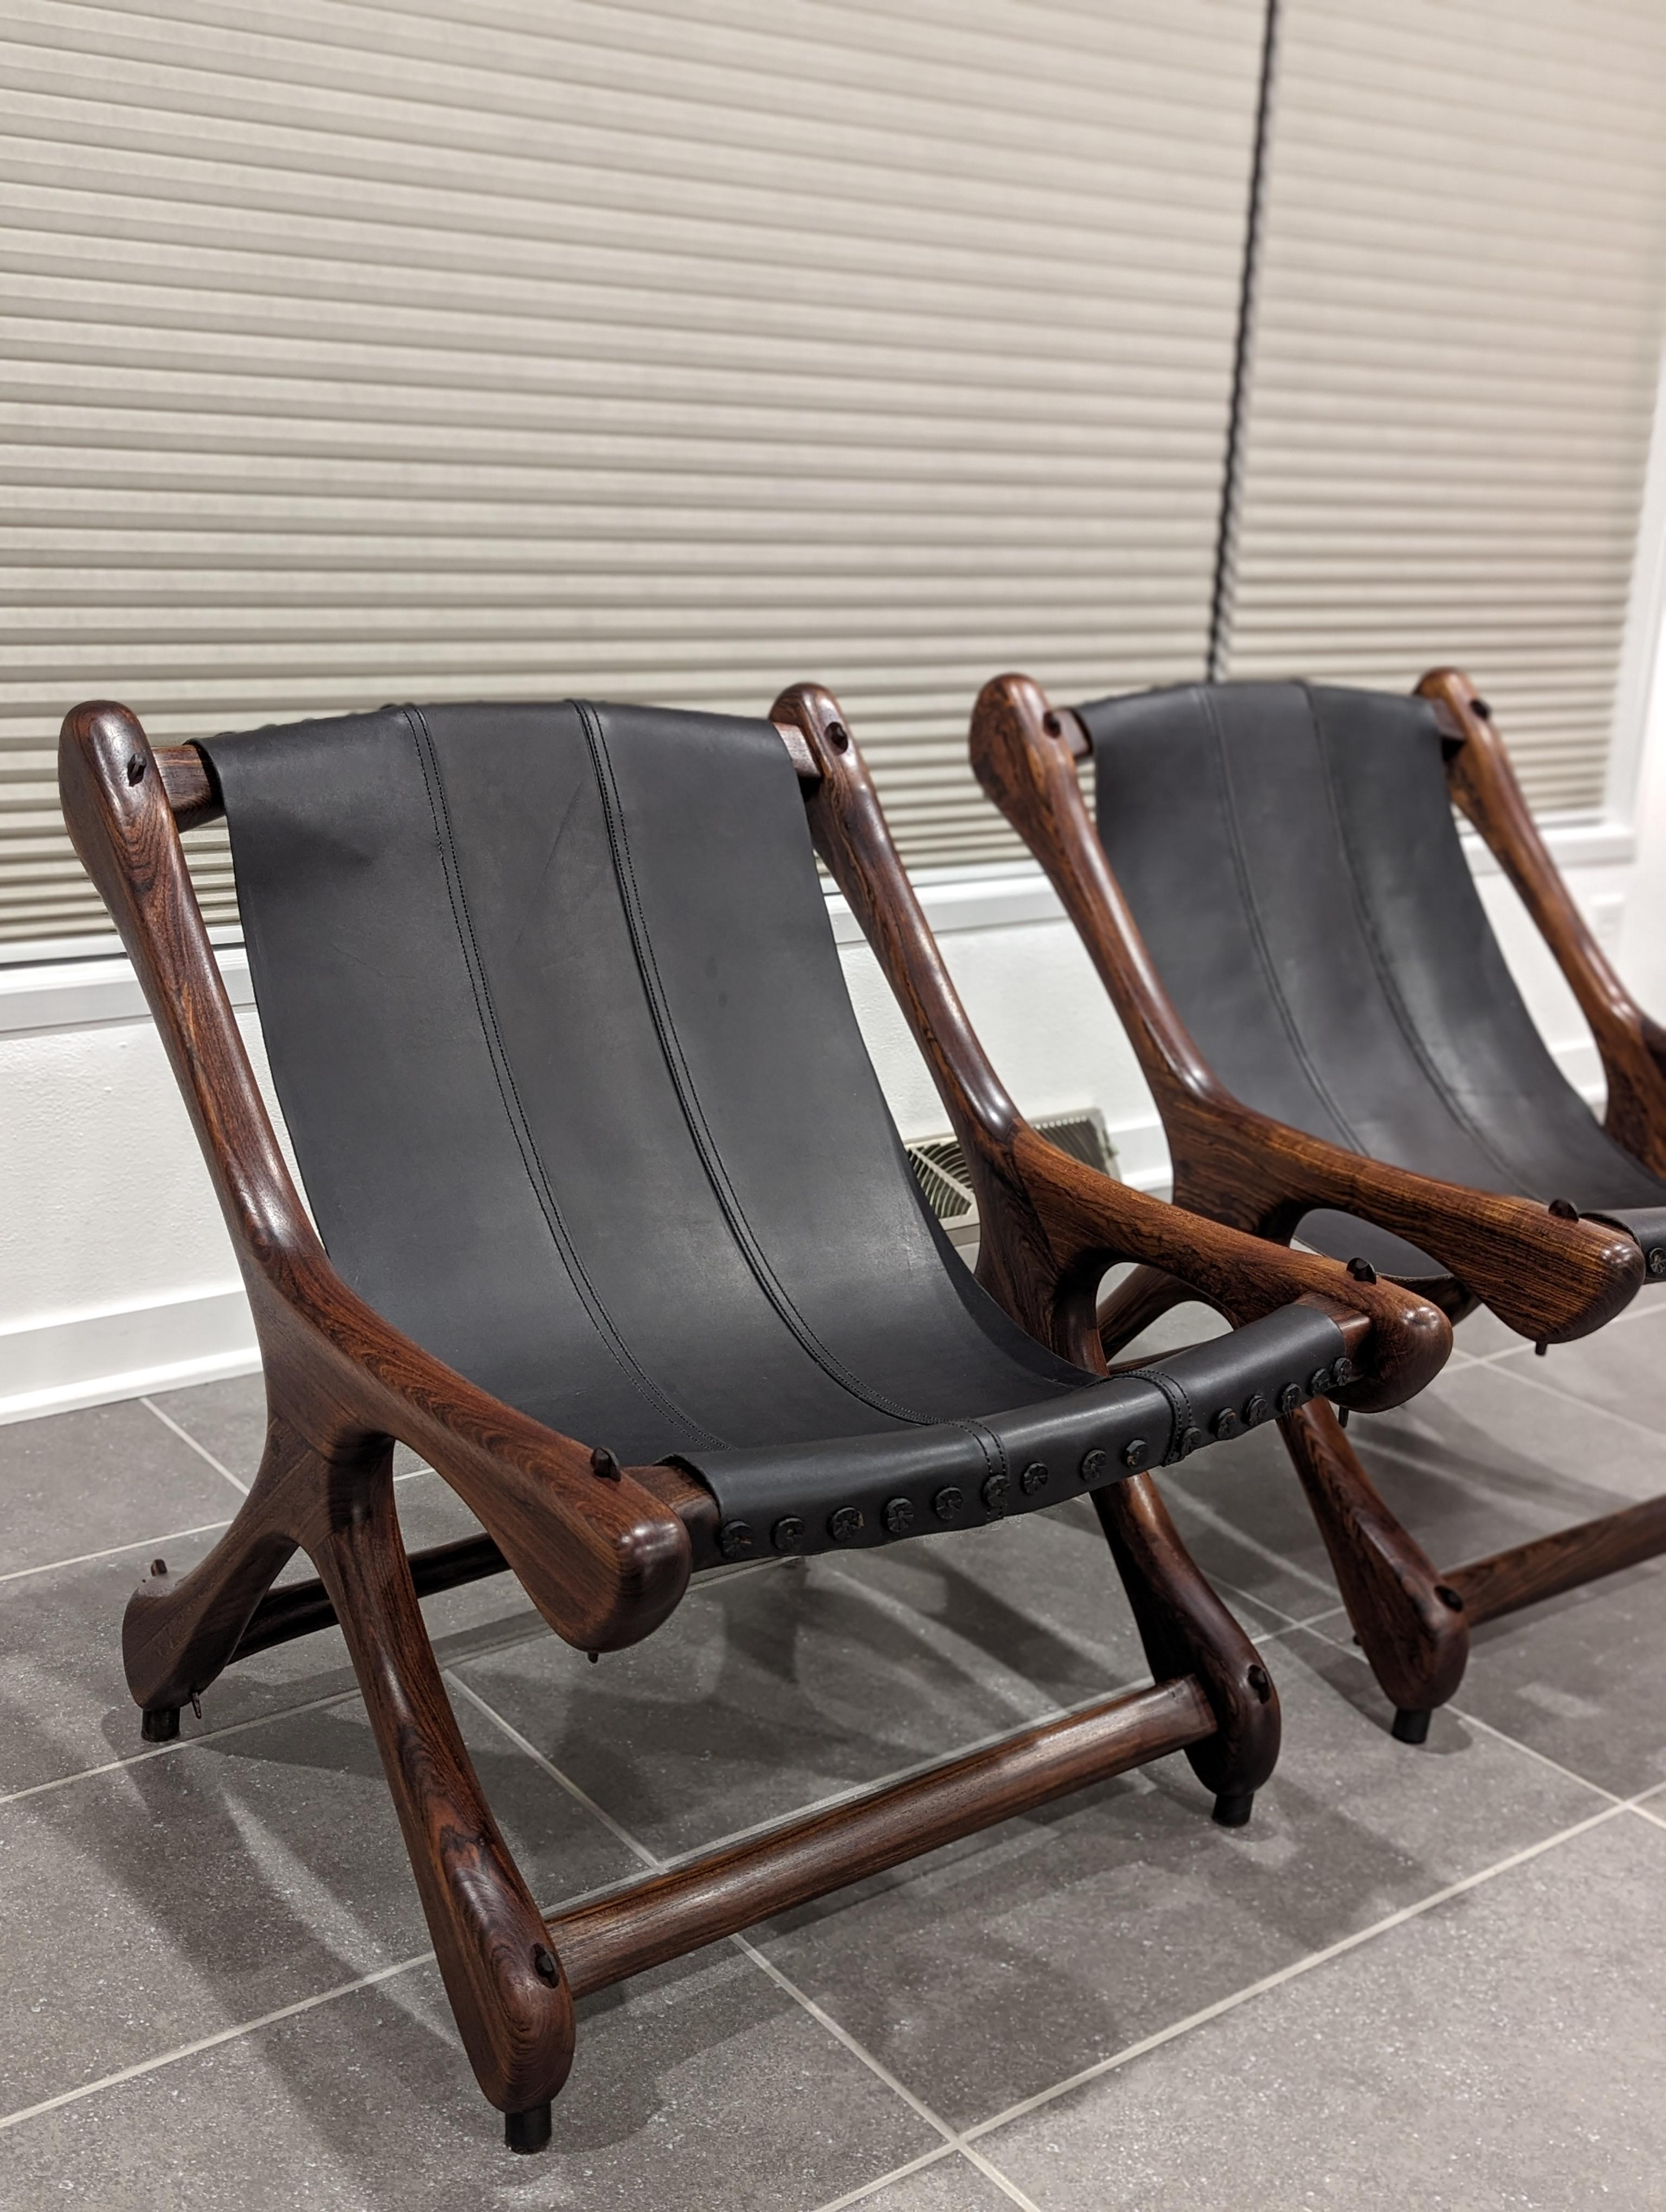 Don Shoemaker Sloucher Rosewood & Leather Sling Chairs for Señal, S.A., 1960s For Sale 13